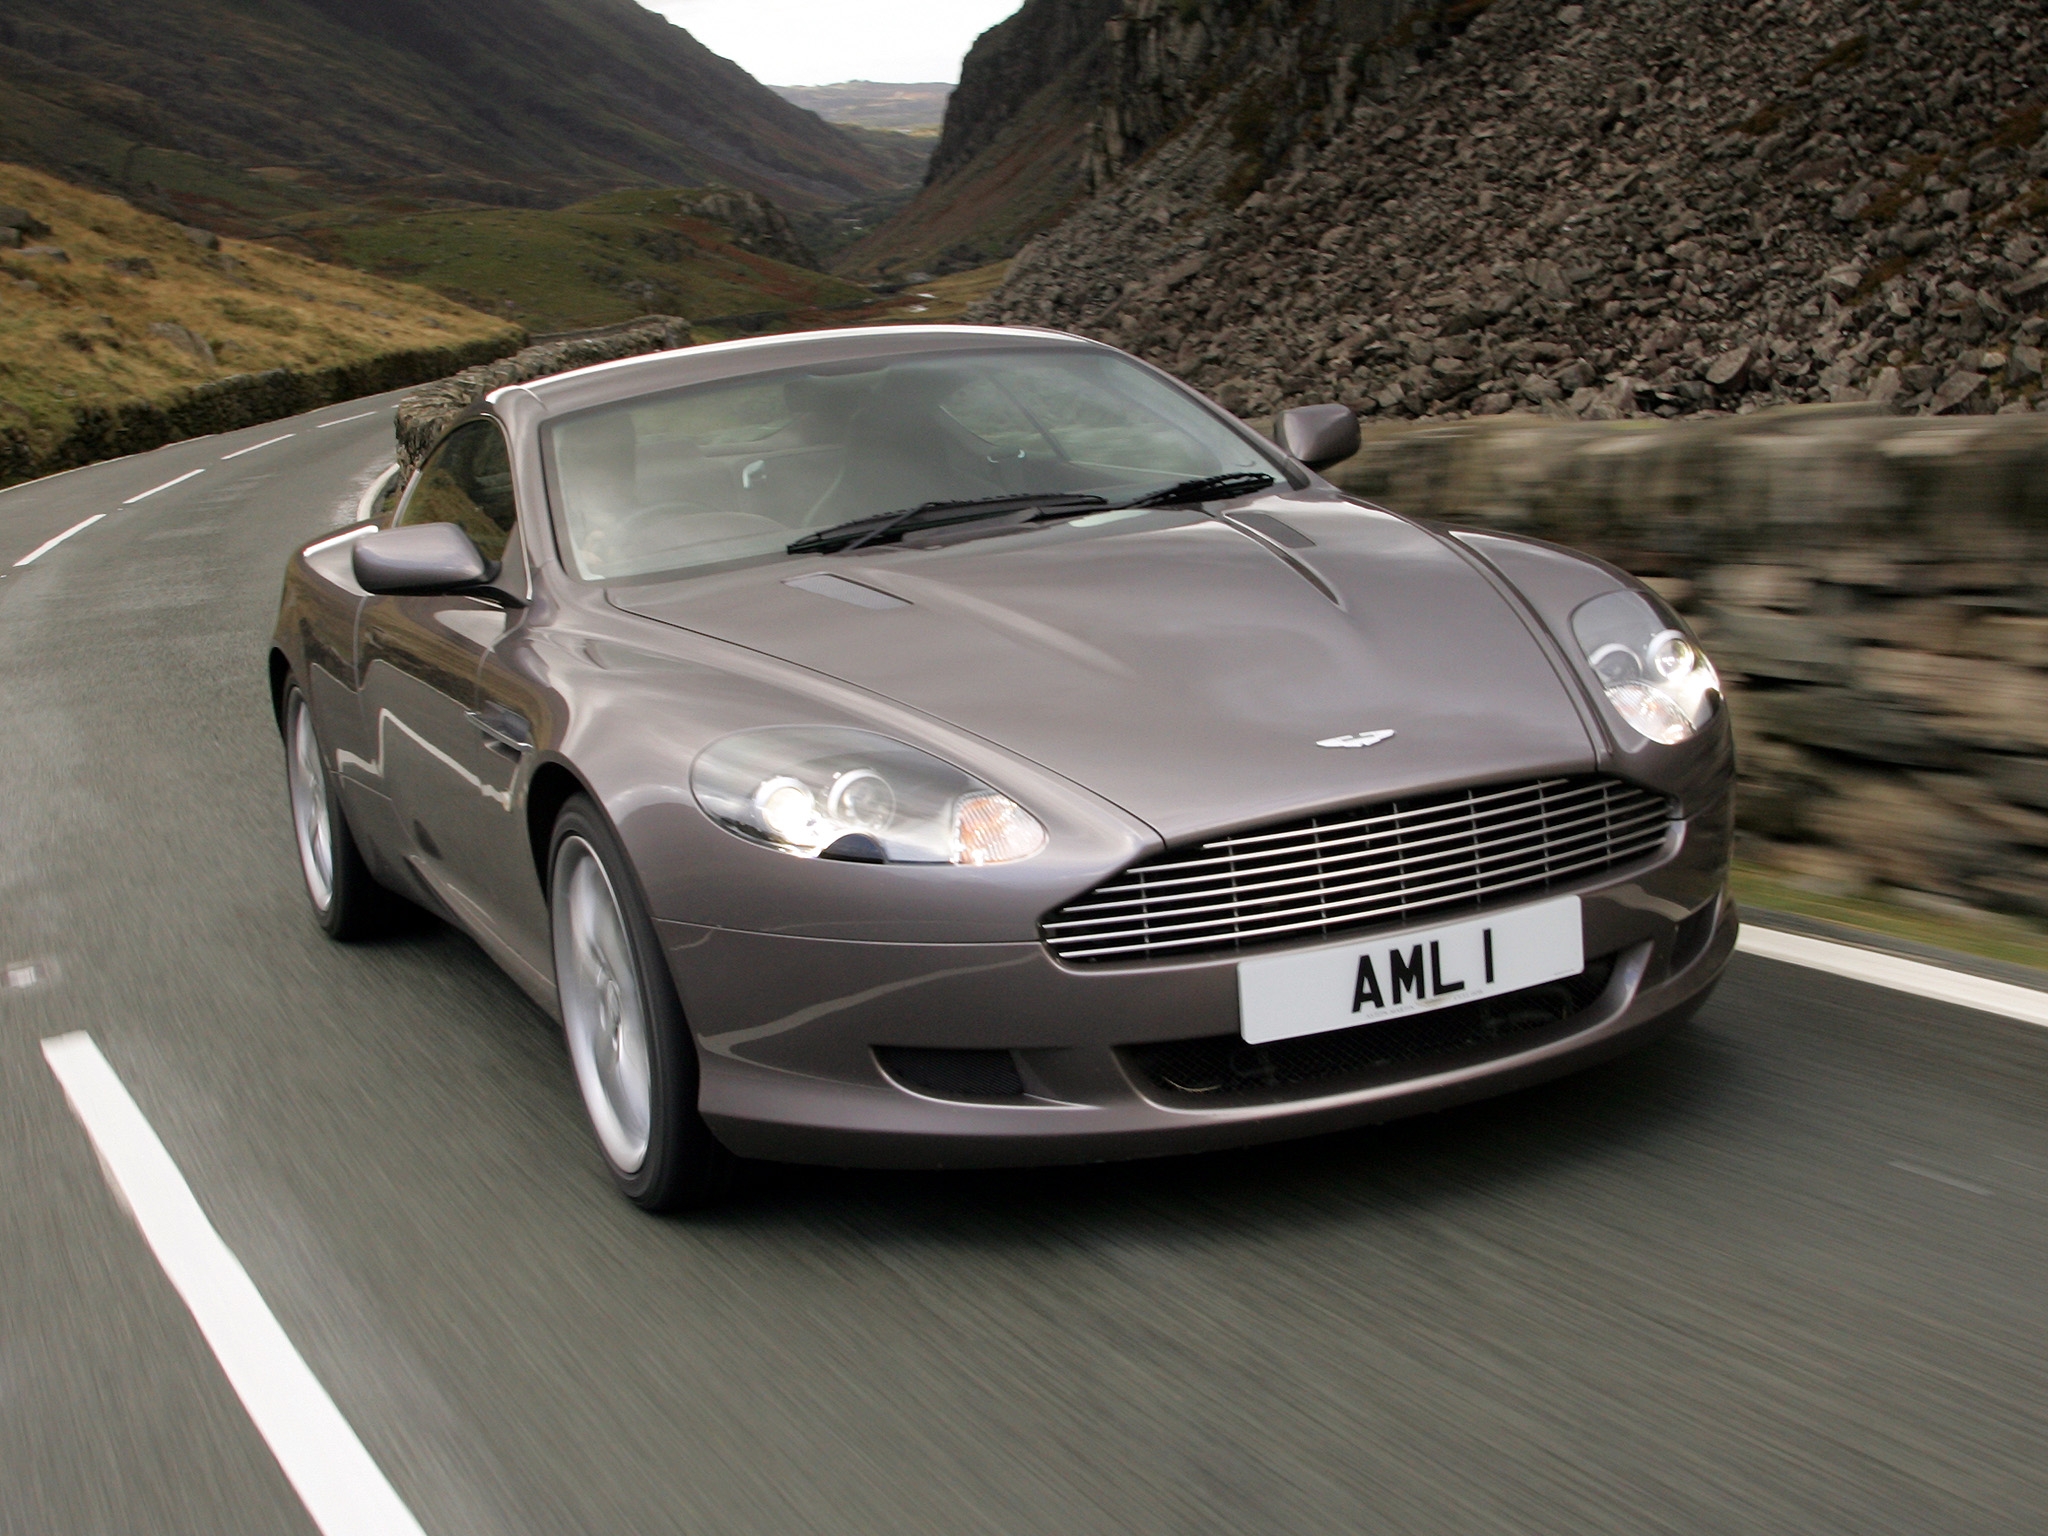 Windows Backgrounds auto, mountains, aston martin, cars, asphalt, front view, grey, speed, style, 2004, db9